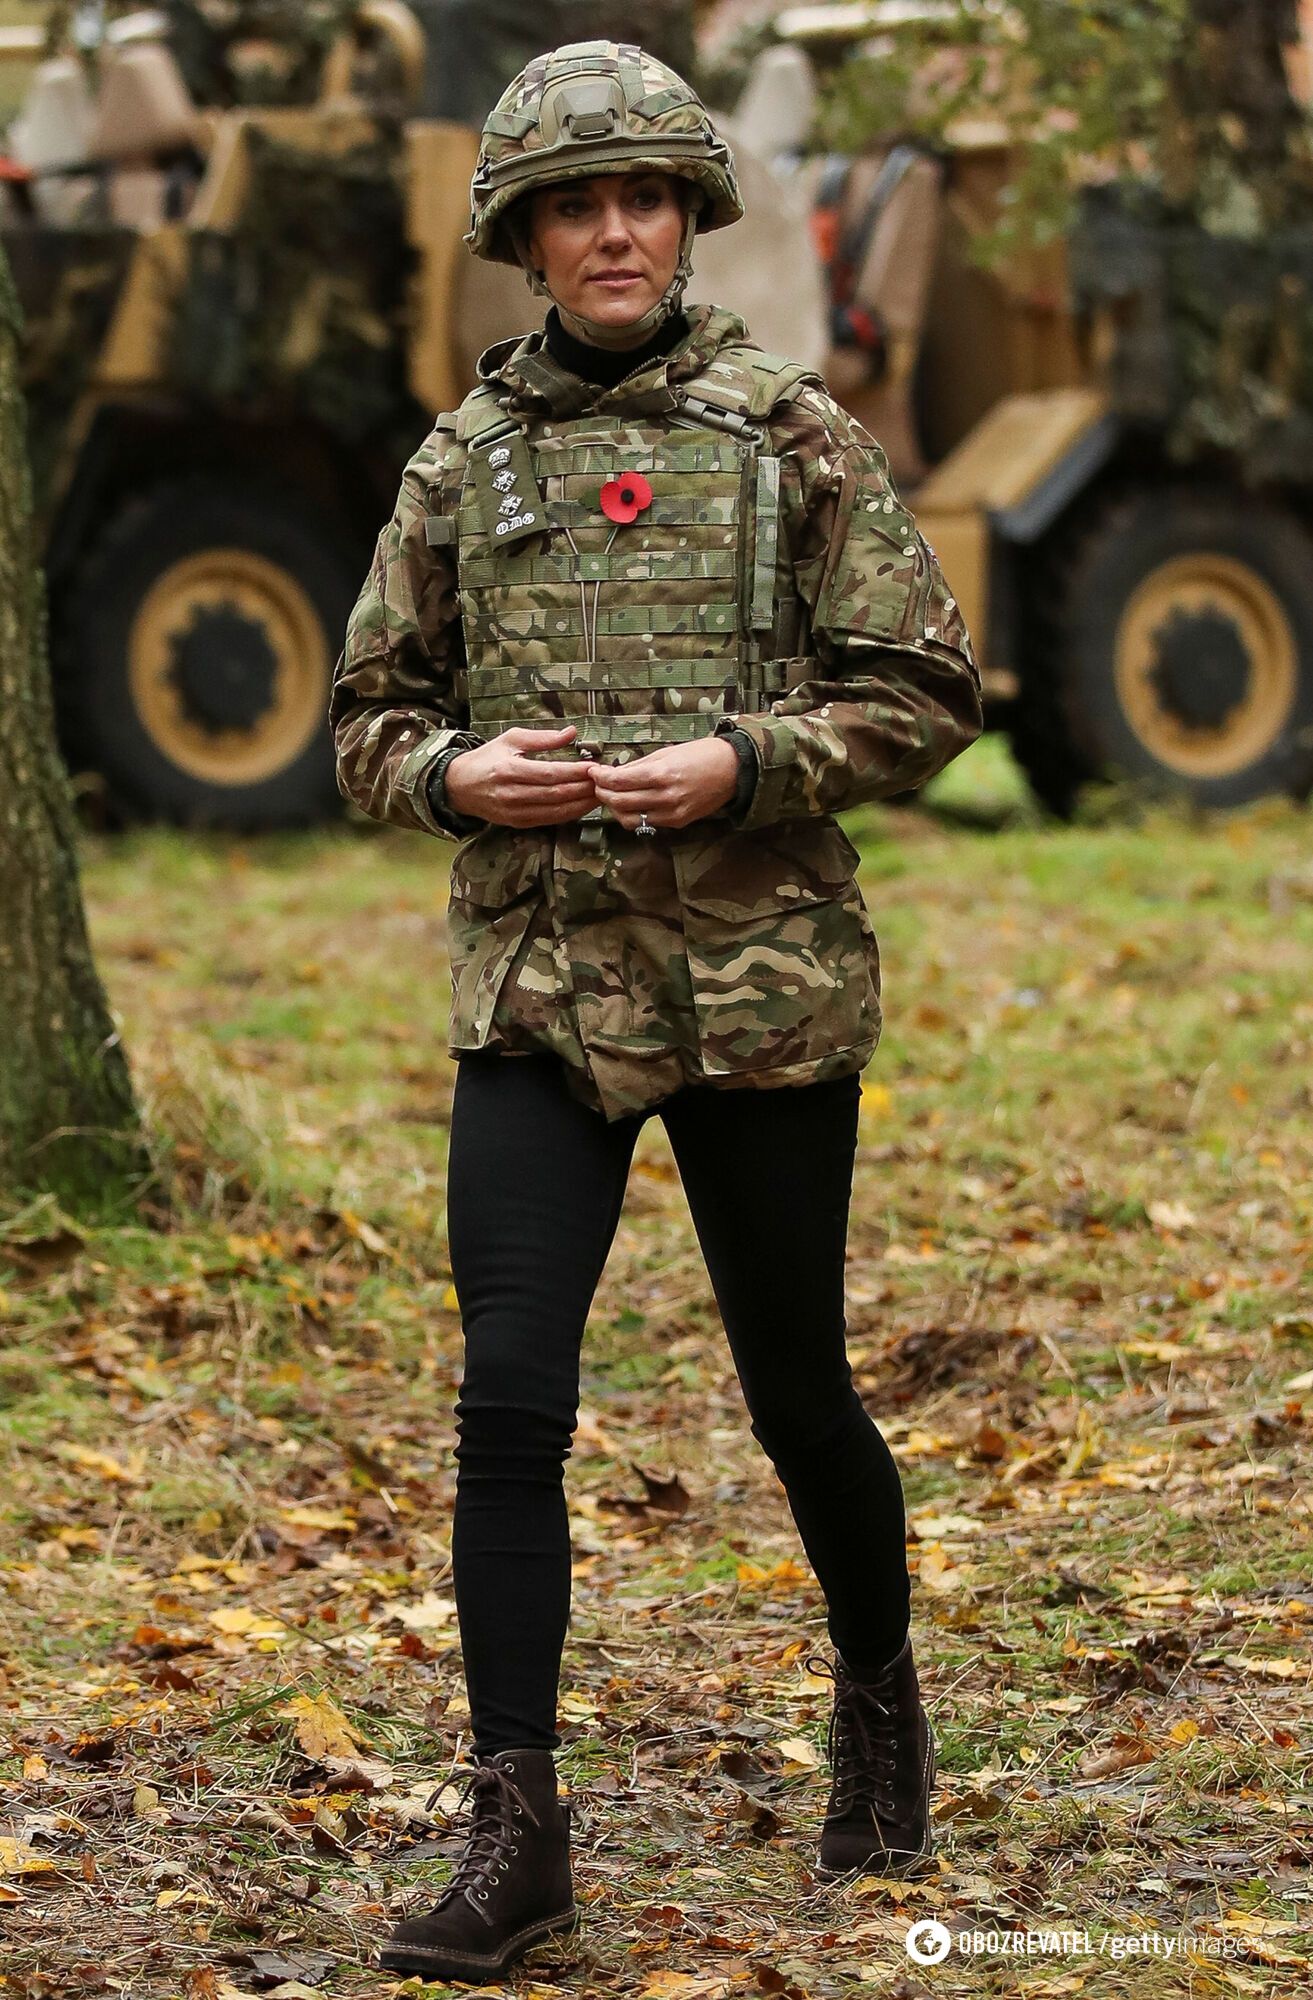 Kate Middleton in combat gear drove armored vehicles and delighted the web. Video